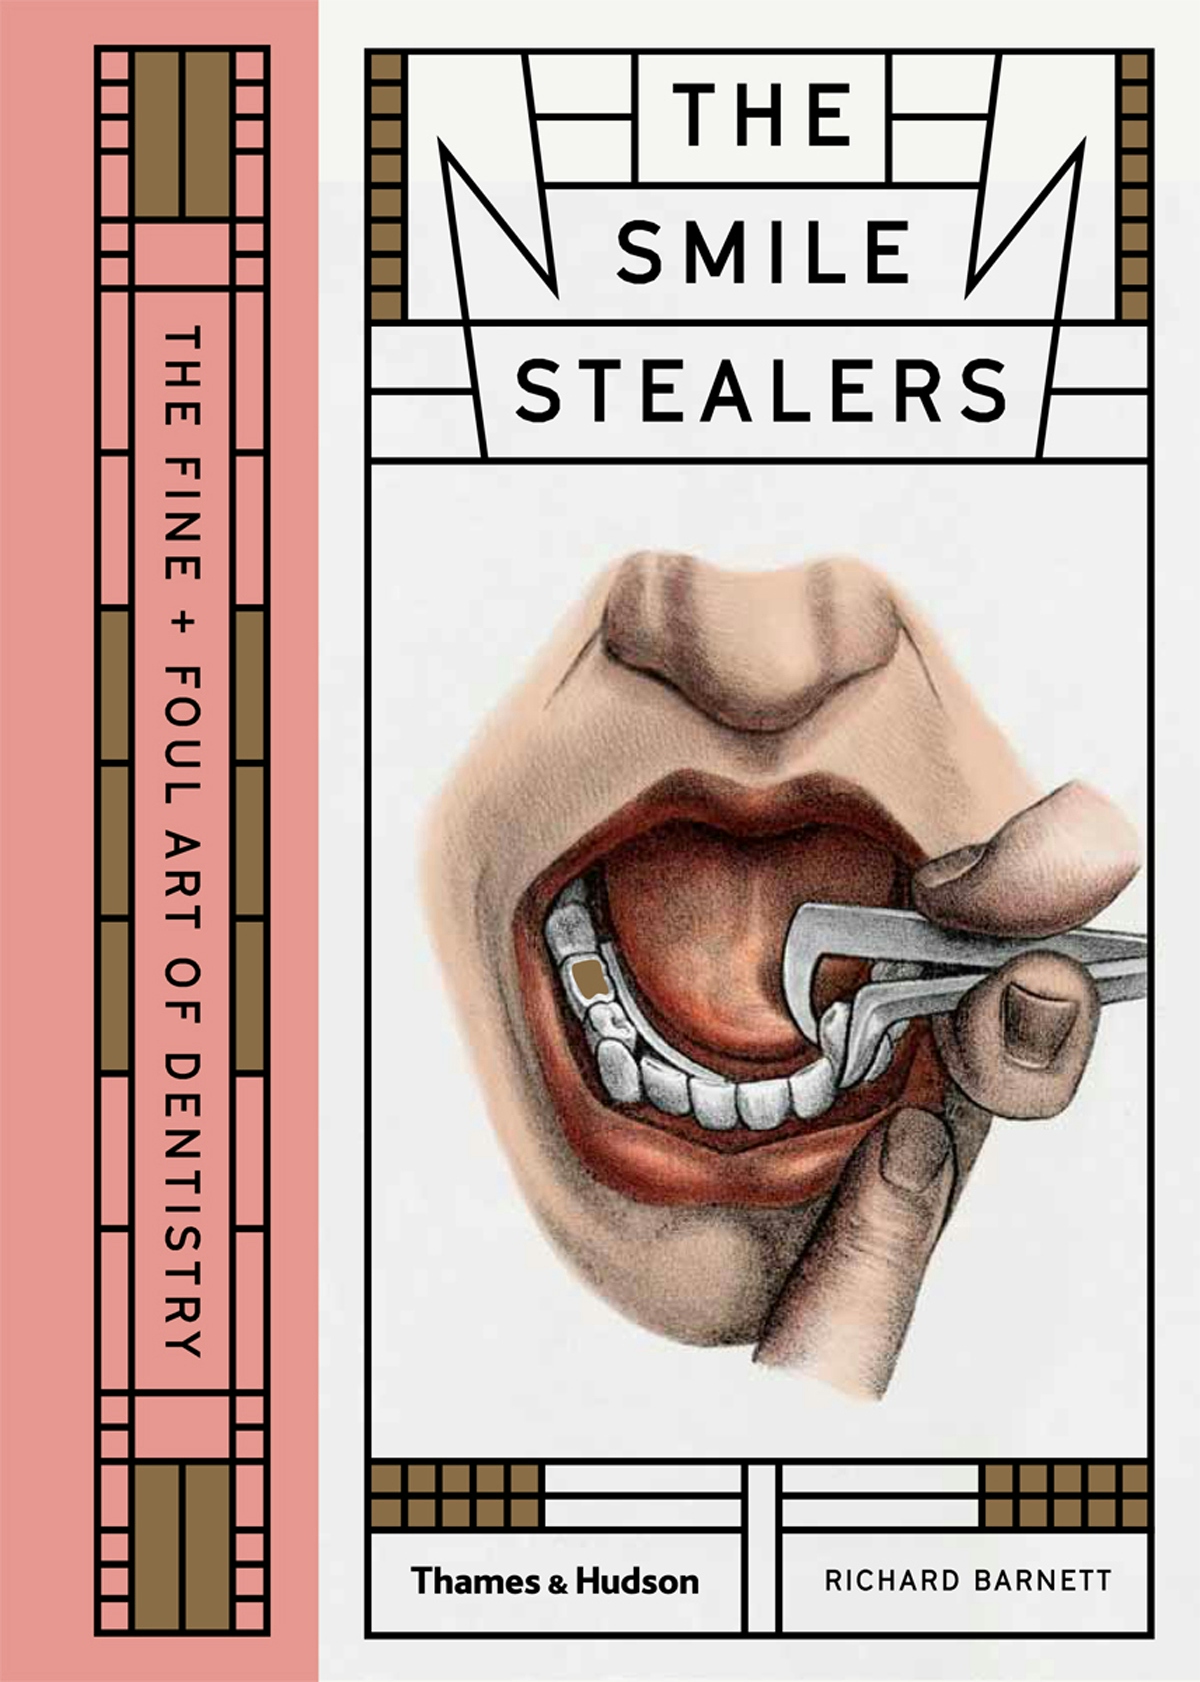 Front cover of the book ‘The Smile Stealers’